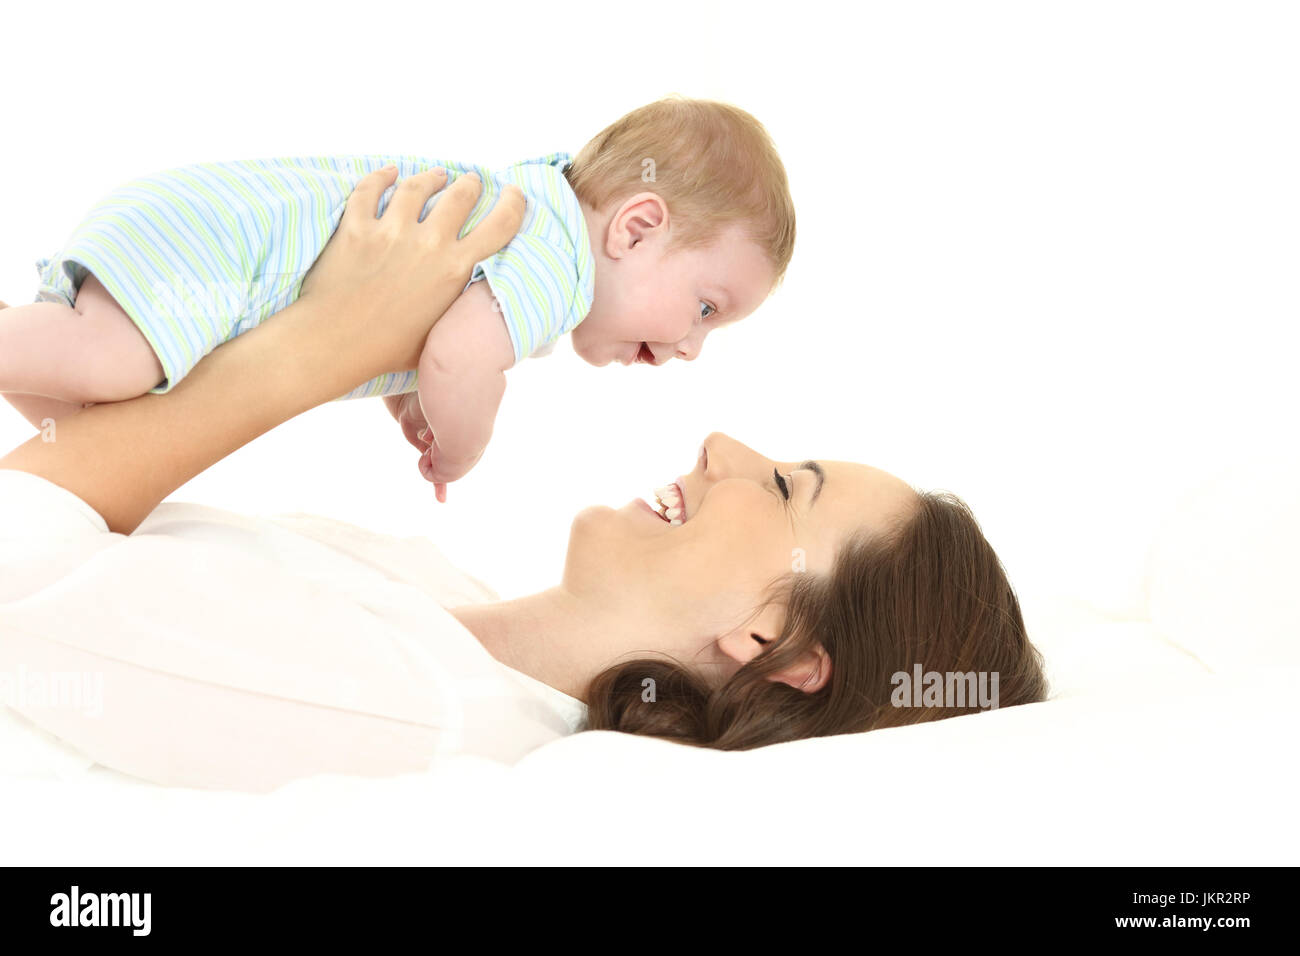 Side view portrait of a mother raising her baby lying on a bed Stock Photo